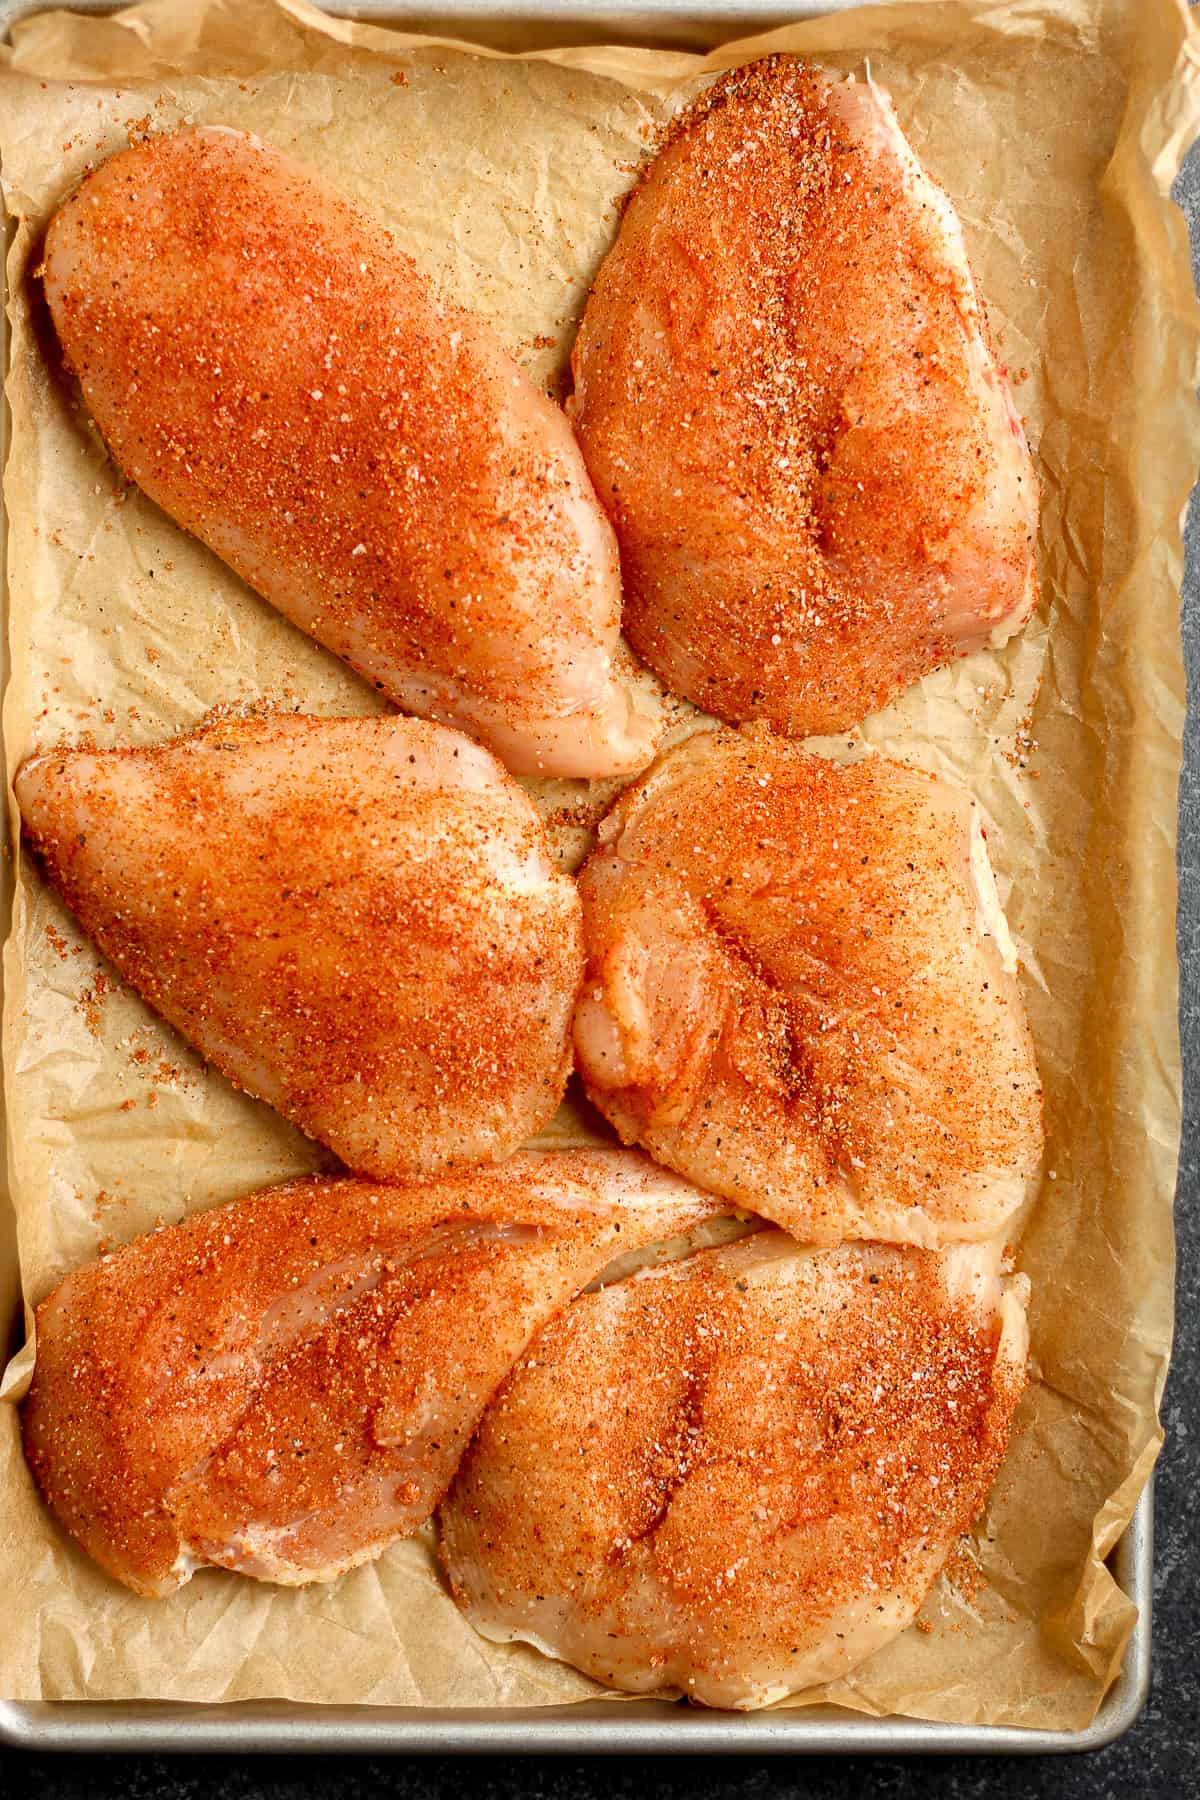 A pan of six raw and seasoned chicken breasts.